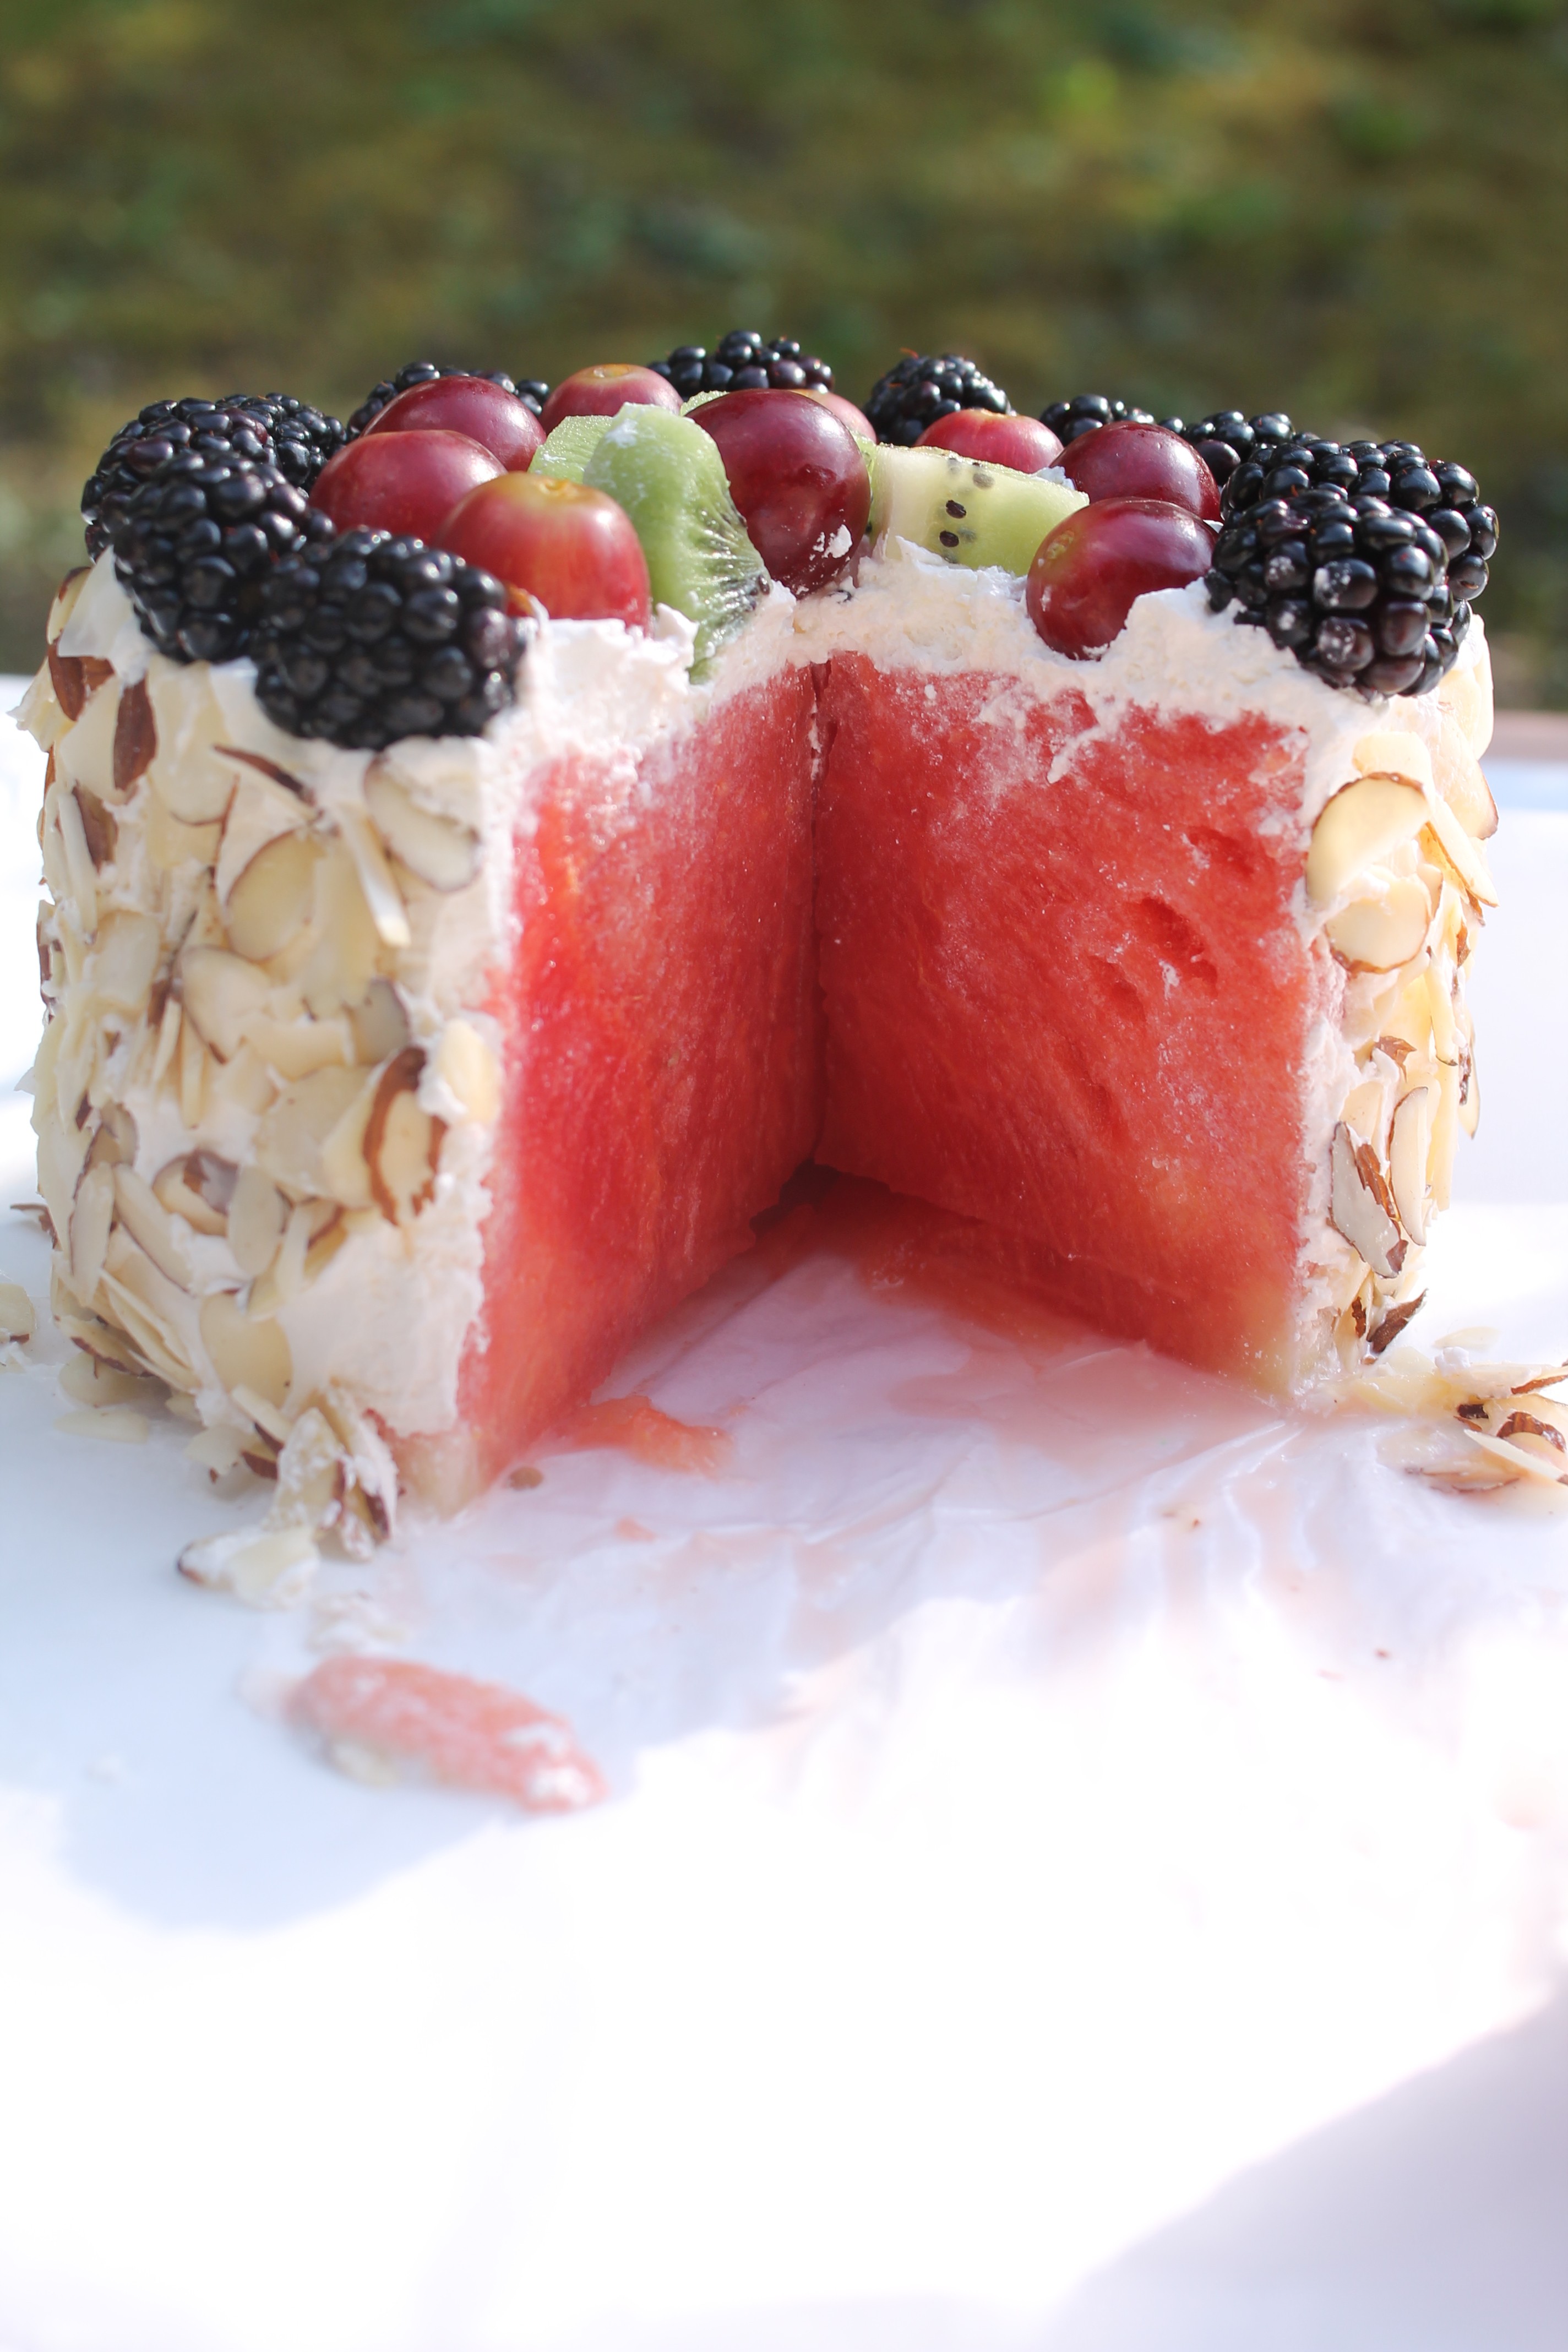 “Summer Delights: Creative Ways to Use Every Part of a Watermelon!”